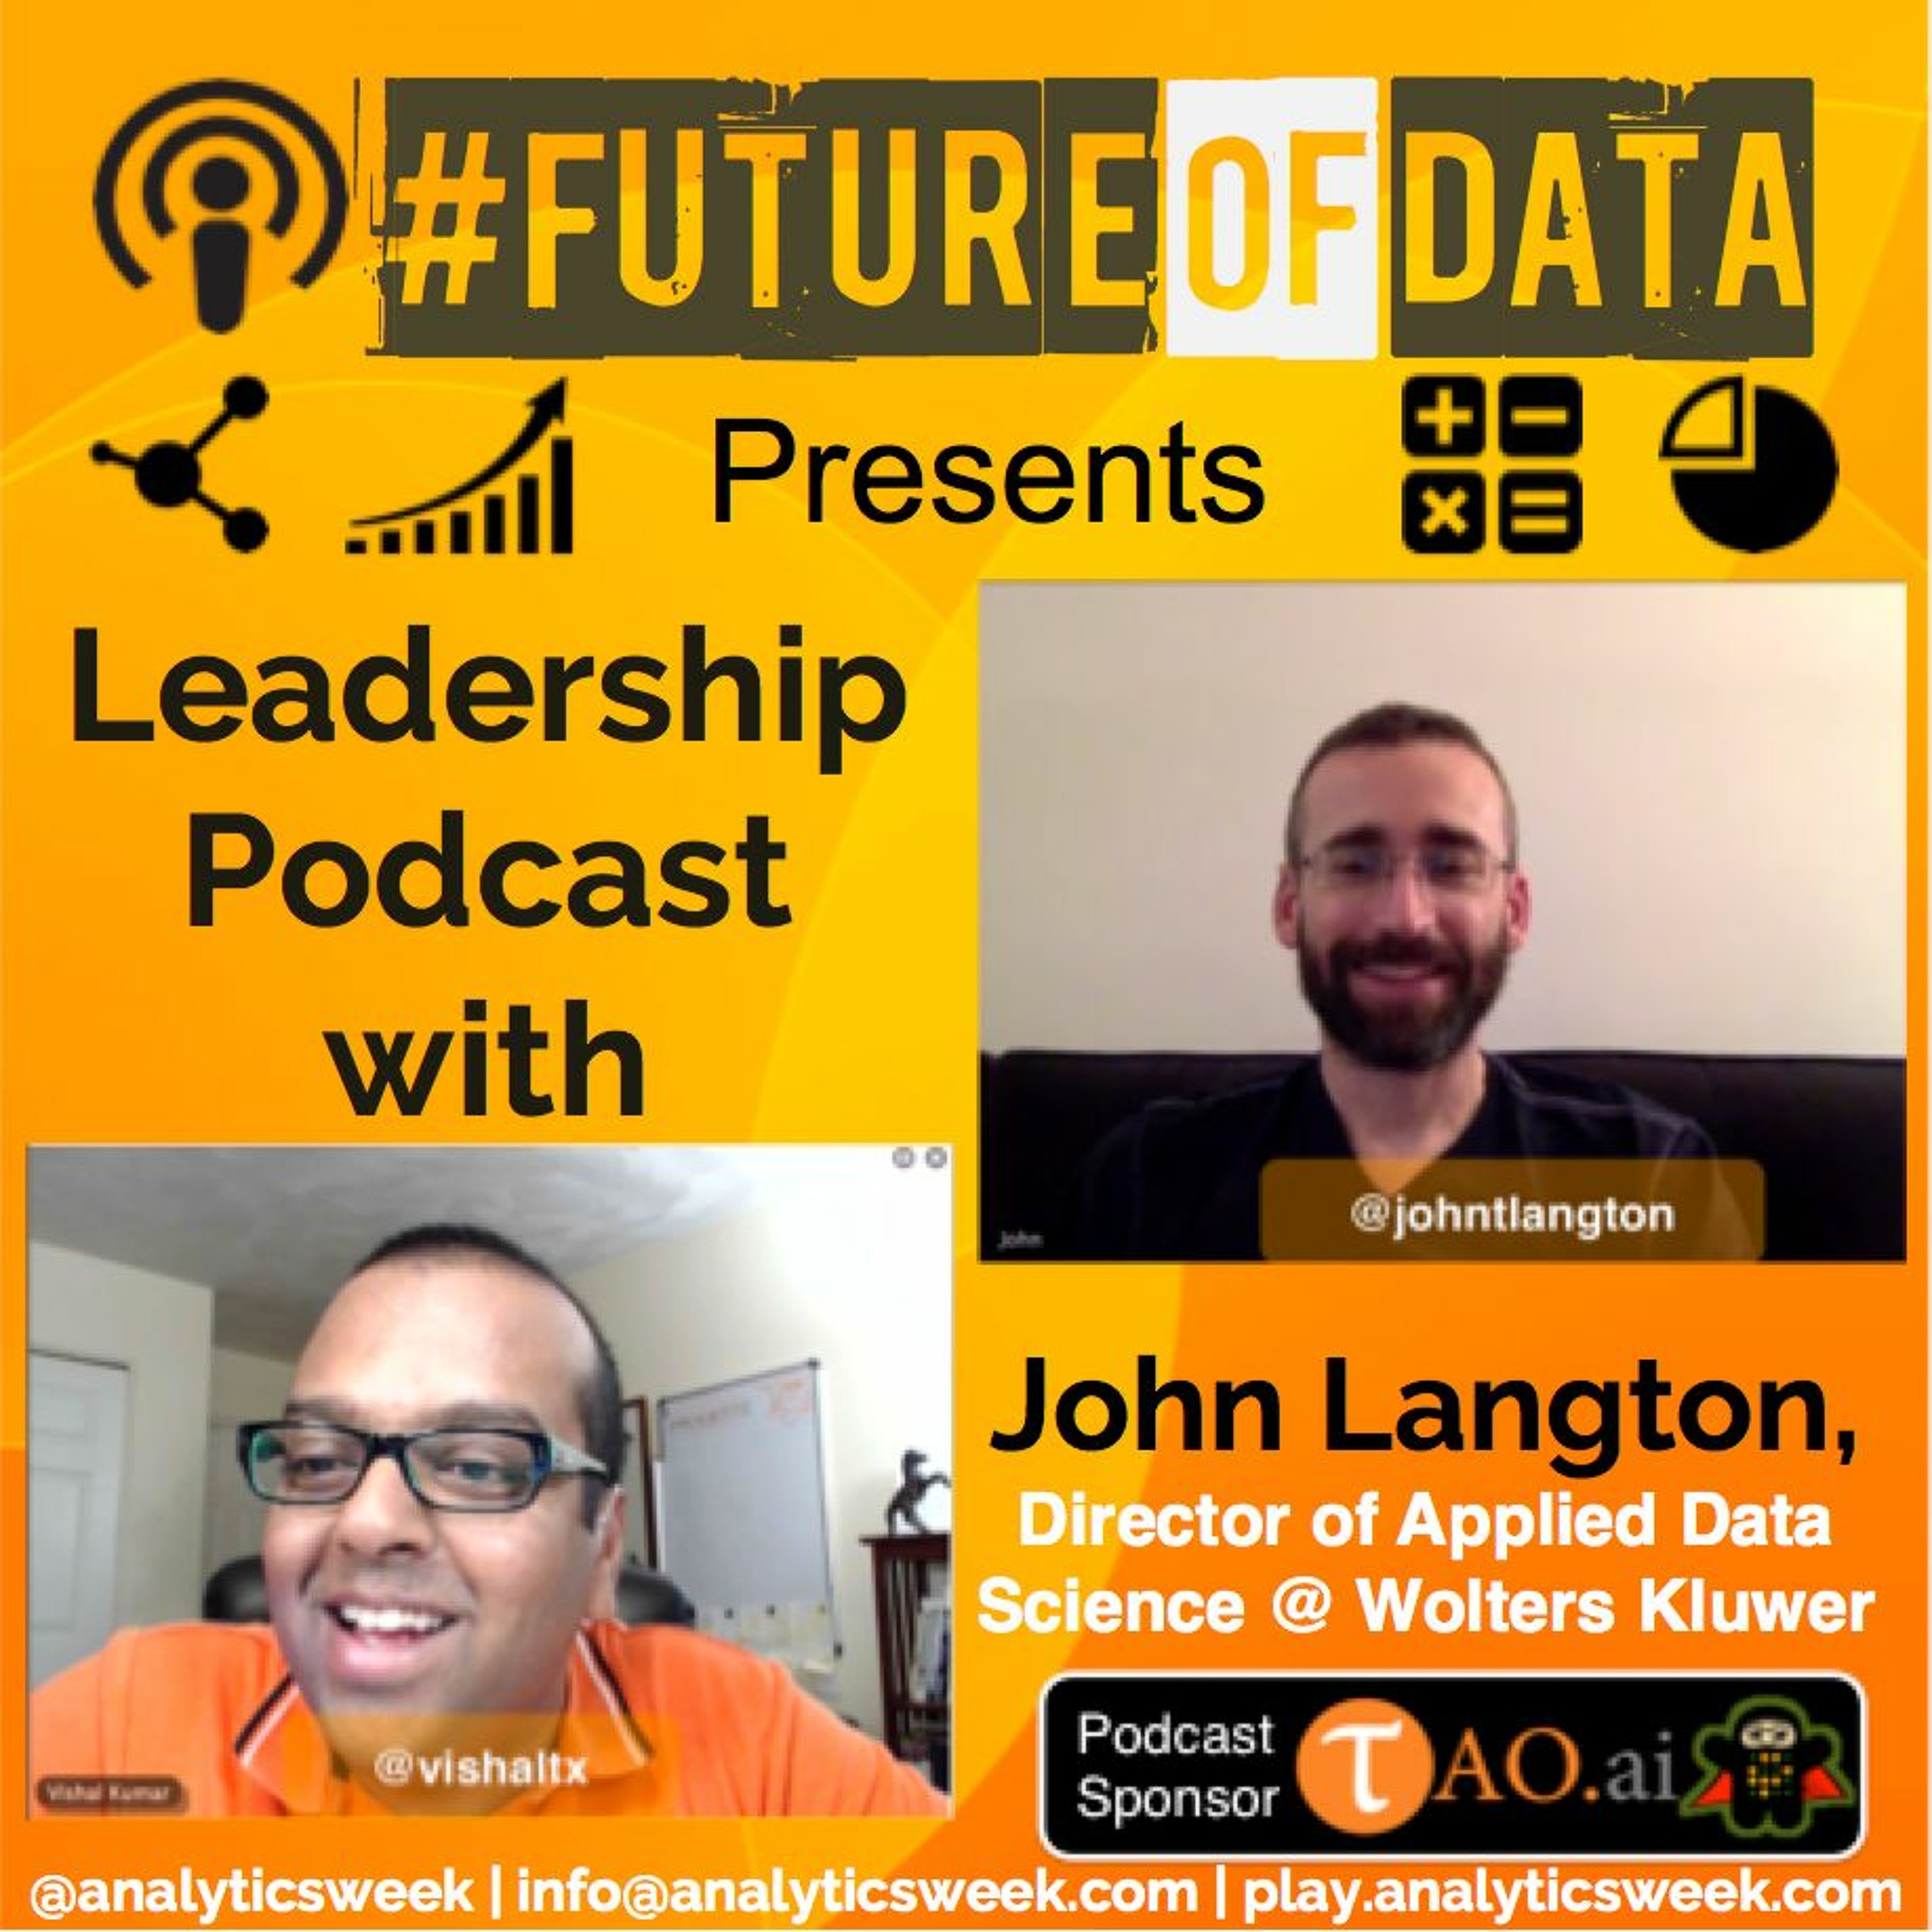 @JohnTLangton from @Wolters_Kluwer discussed his #AI Lead Startup Journey